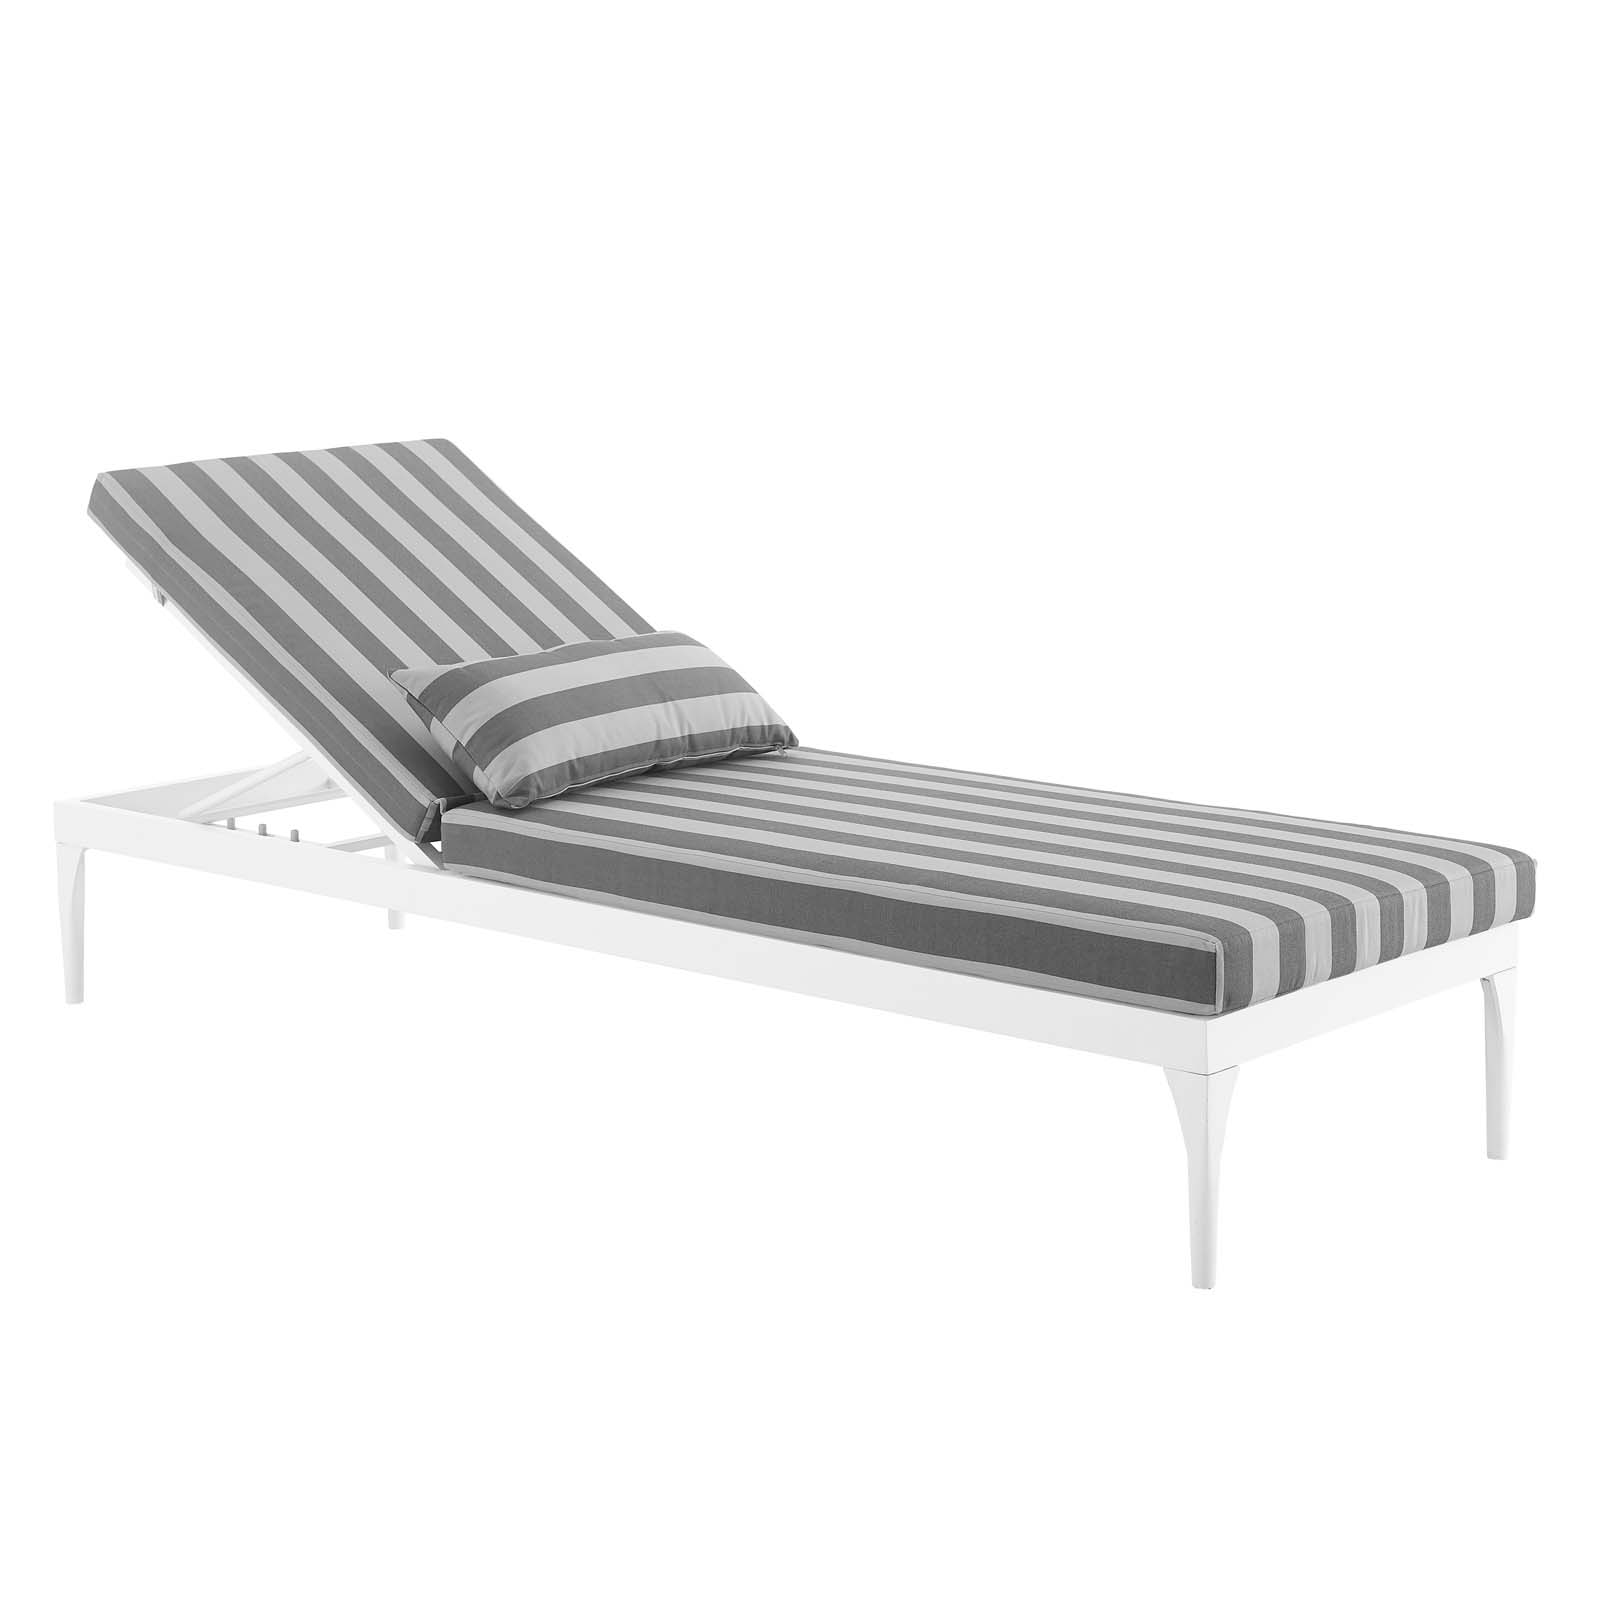 Modern Contemporary Urban Design Outdoor Patio Balcony Garden Furniture Lounge Chair Chaise, Fabric Metal Steel, White Grey Gray - image 2 of 7